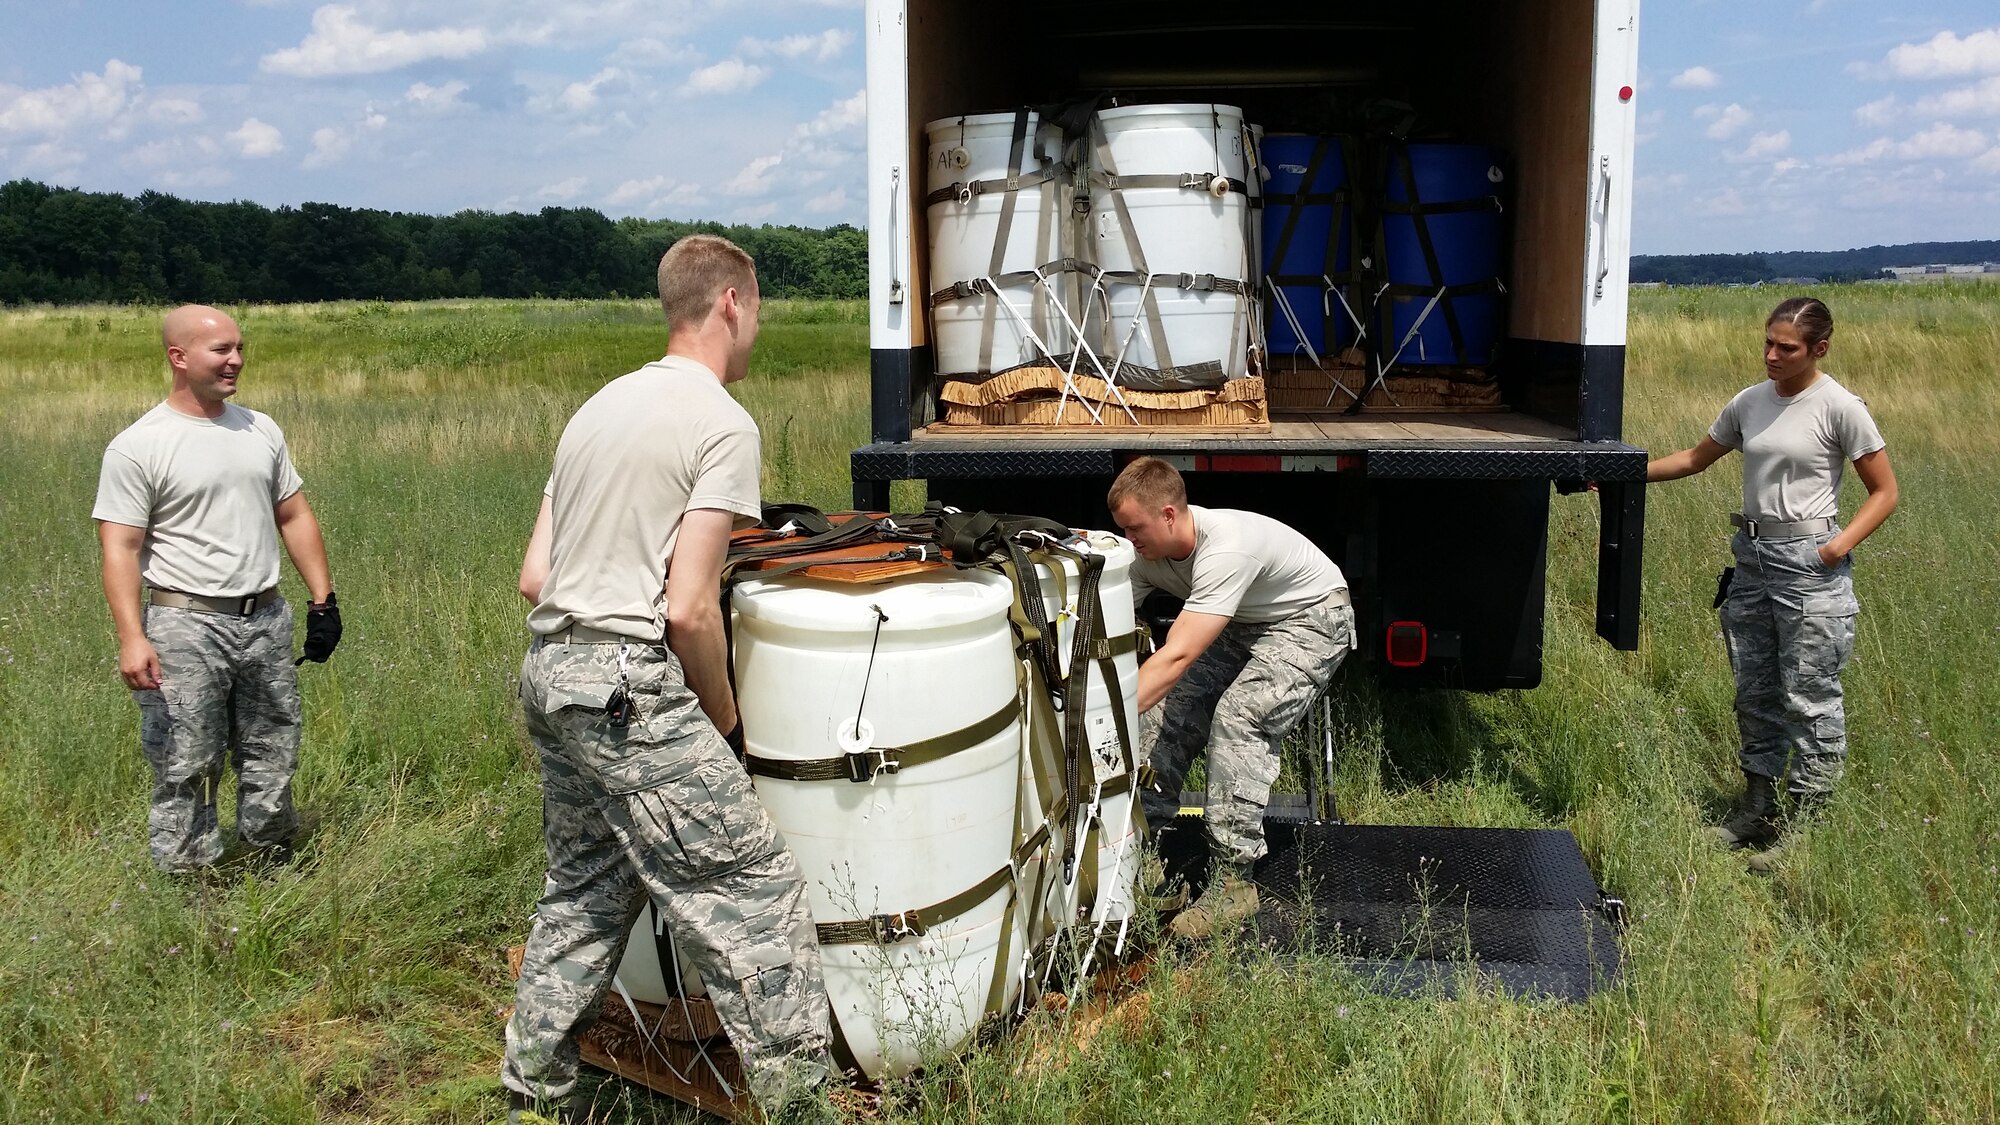 Airmen from the 103rd Logistics Readiness Squadron maneuver the container delivery system onto a truck after a successful air drop training exercise at Westover Air Reserve Base, Chicopee, Massachusetts on July 12, 2014. After collecting the systems, they will be brought back to Bradley Air National Guard Base, East Granby, Connecticut, disassembled and repacked for the next mission. (Air National Guard photo by Tech. Sgt. Joshua Mead/Released)